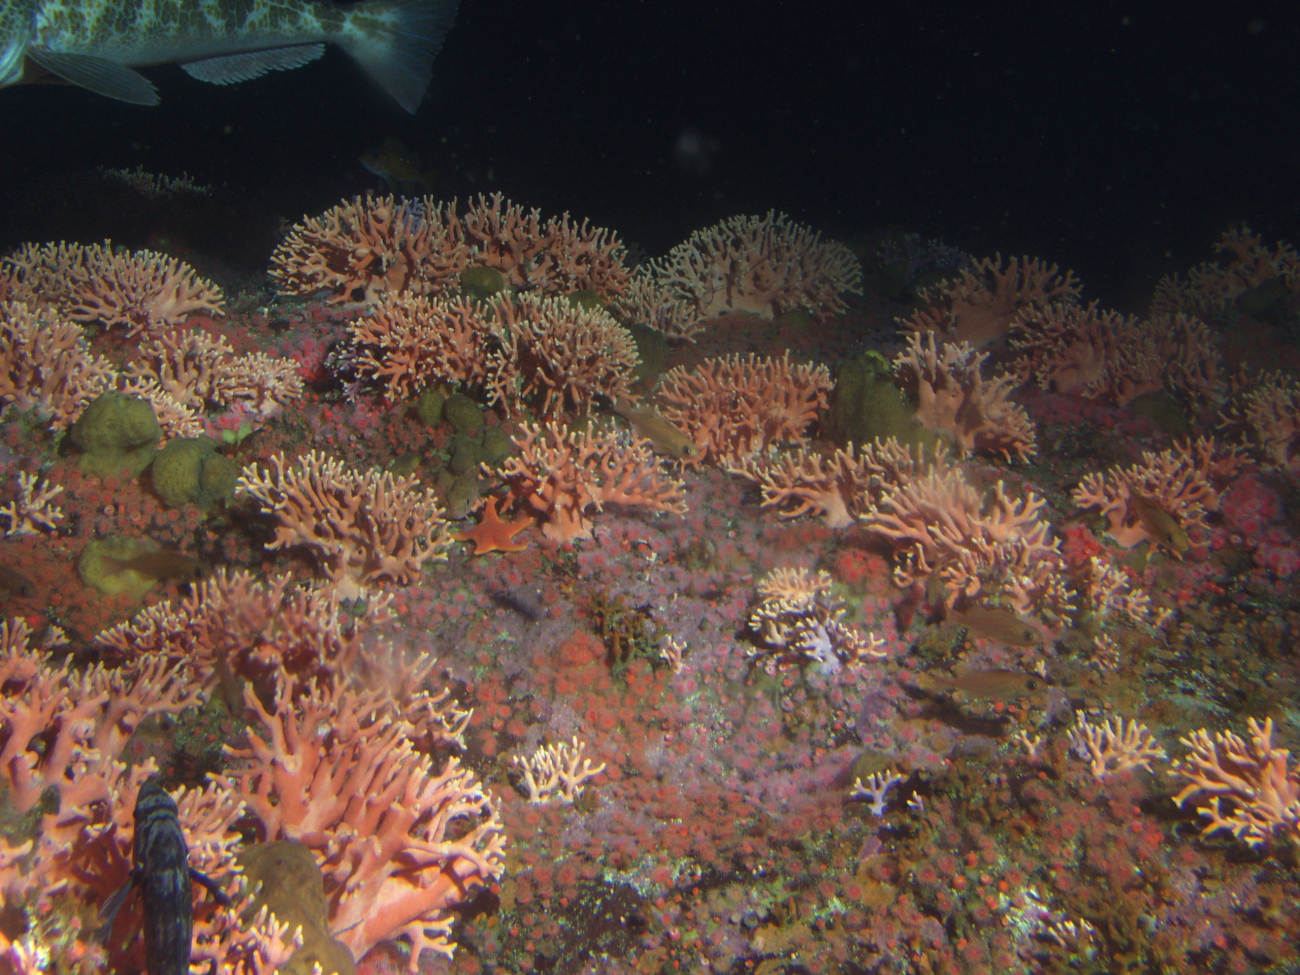 Dense hydrocoral (Stylaster californicus) and invertebrate cover in rockyreef habitat at 50 meters